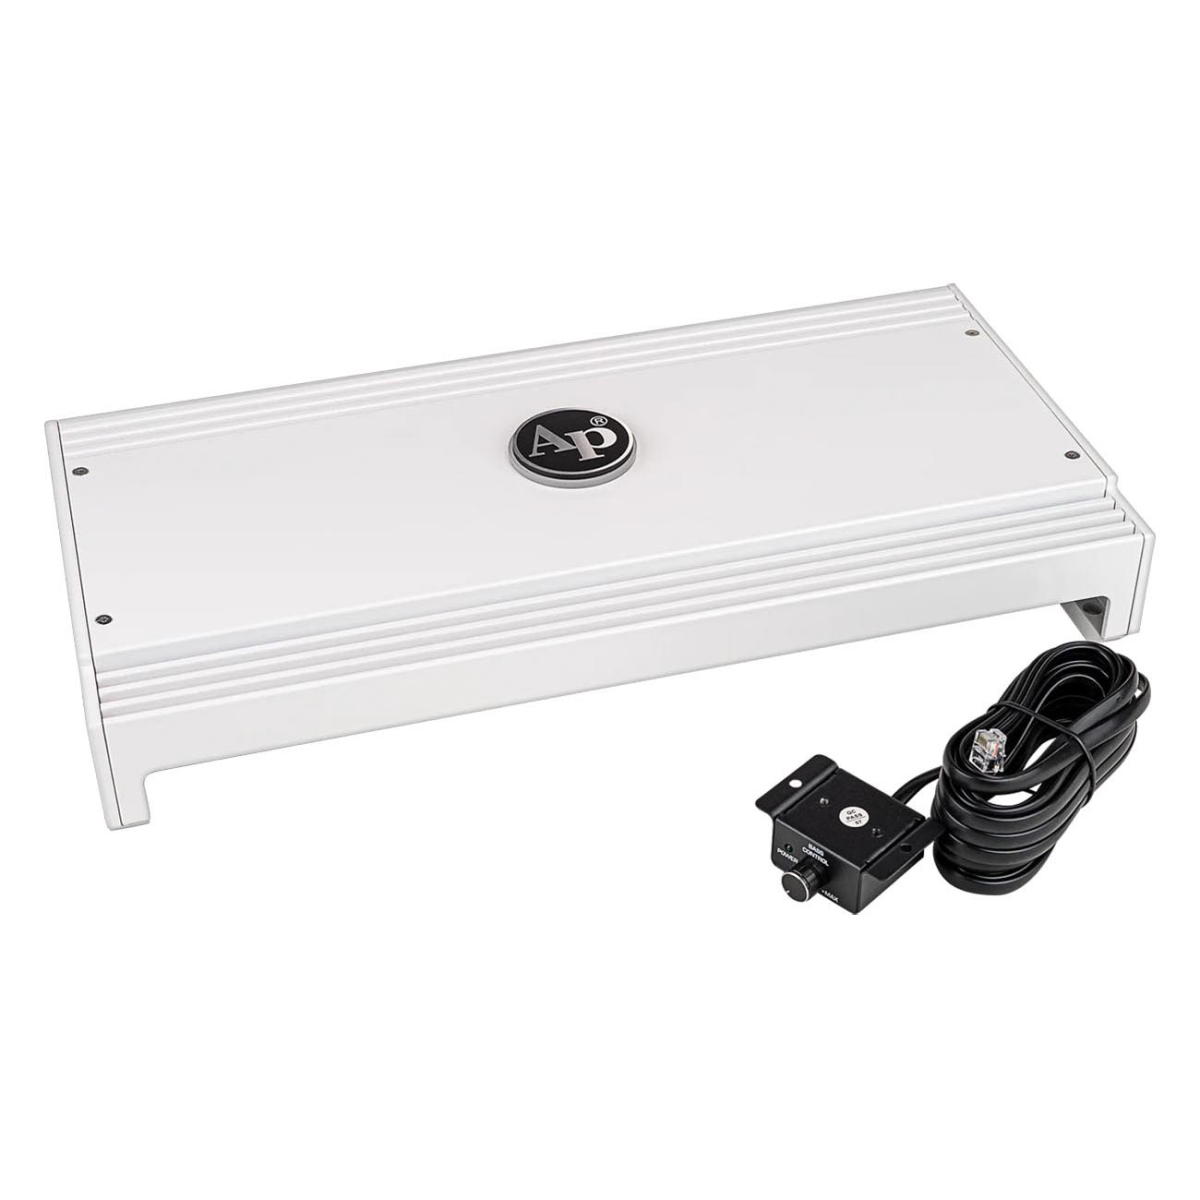 Picture of Audiopipemap APSR8100GS 3200W 8 Channel Class D Marine Amplifier with Remote Bass Knob